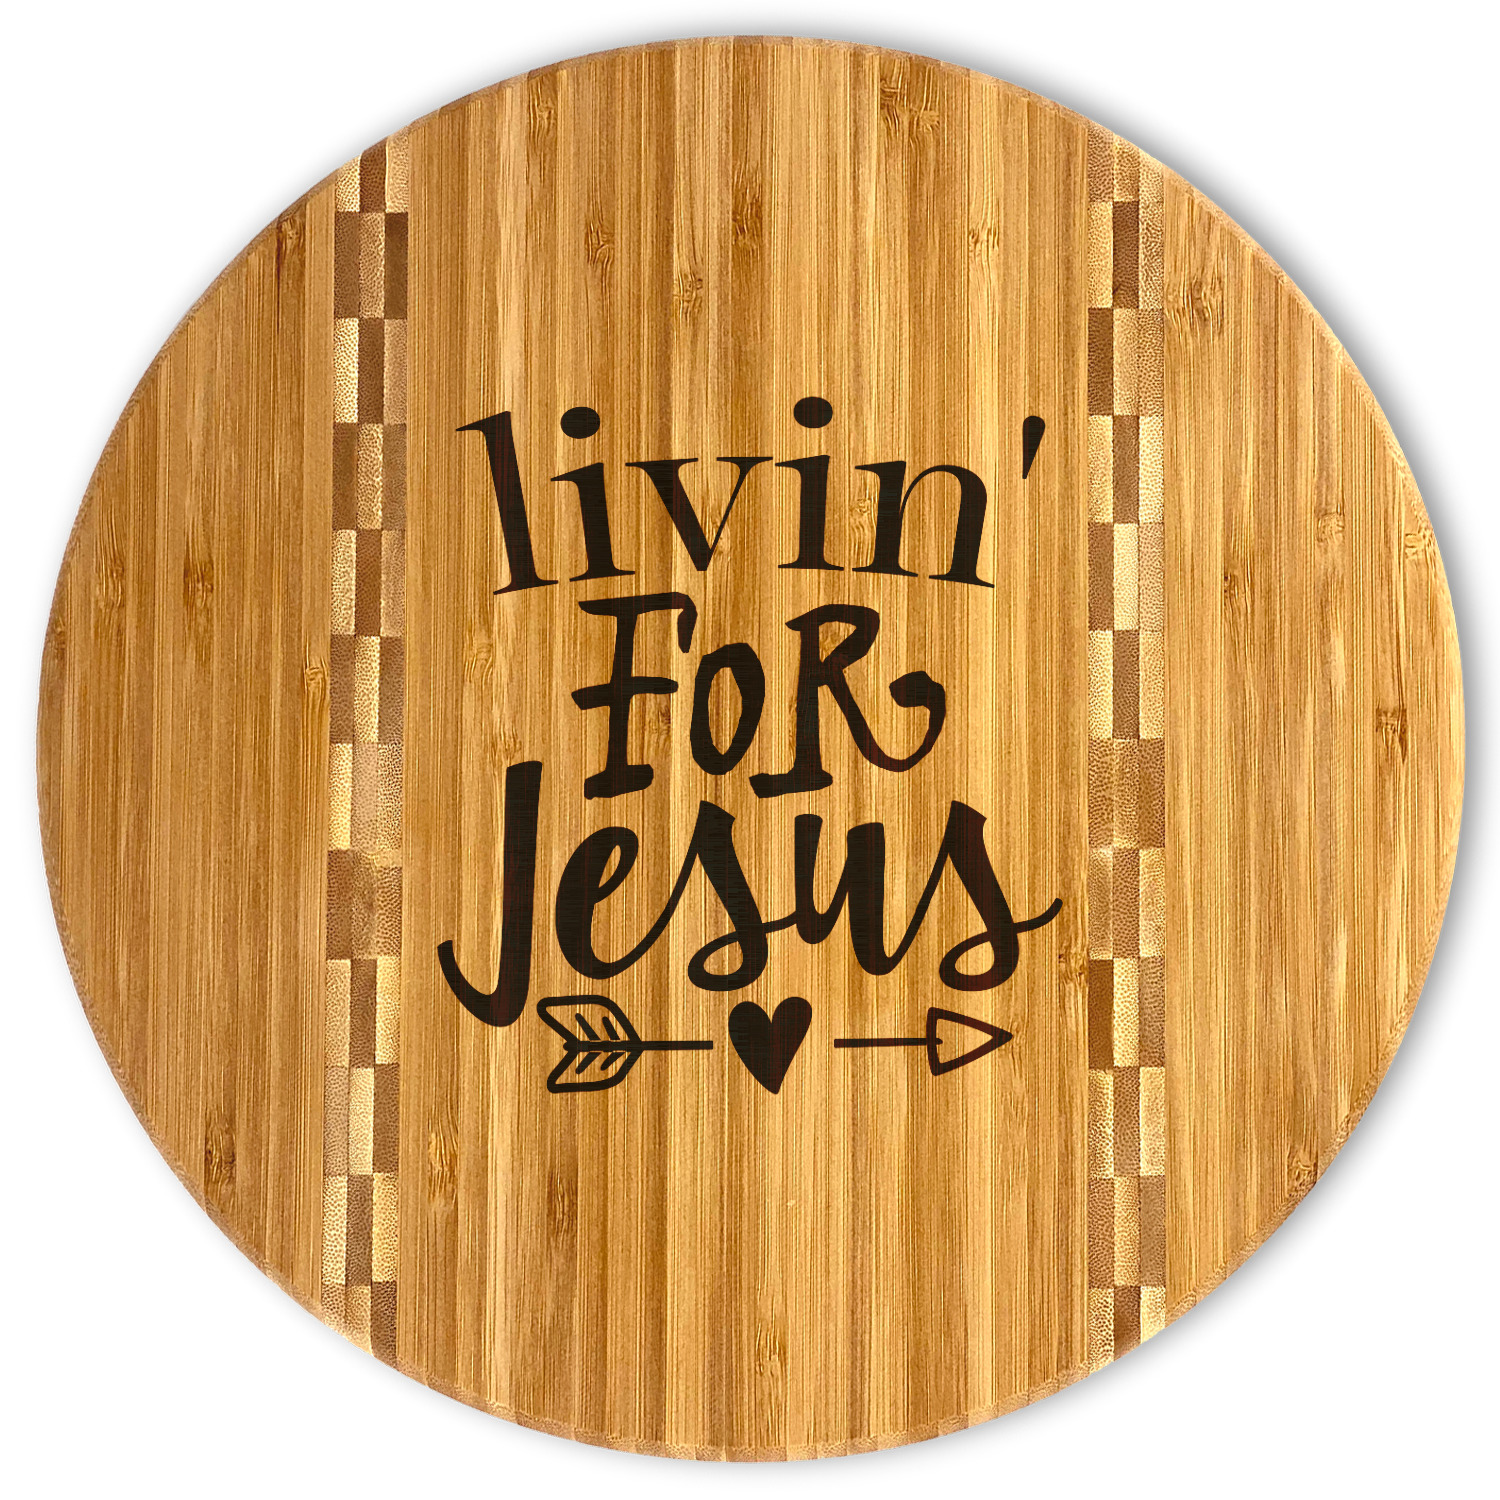 https://www.youcustomizeit.com/common/MAKE/1038318/Religious-Quotes-and-Sayings-Bamboo-Cutting-Boards-FRONT.jpg?lm=1658265601